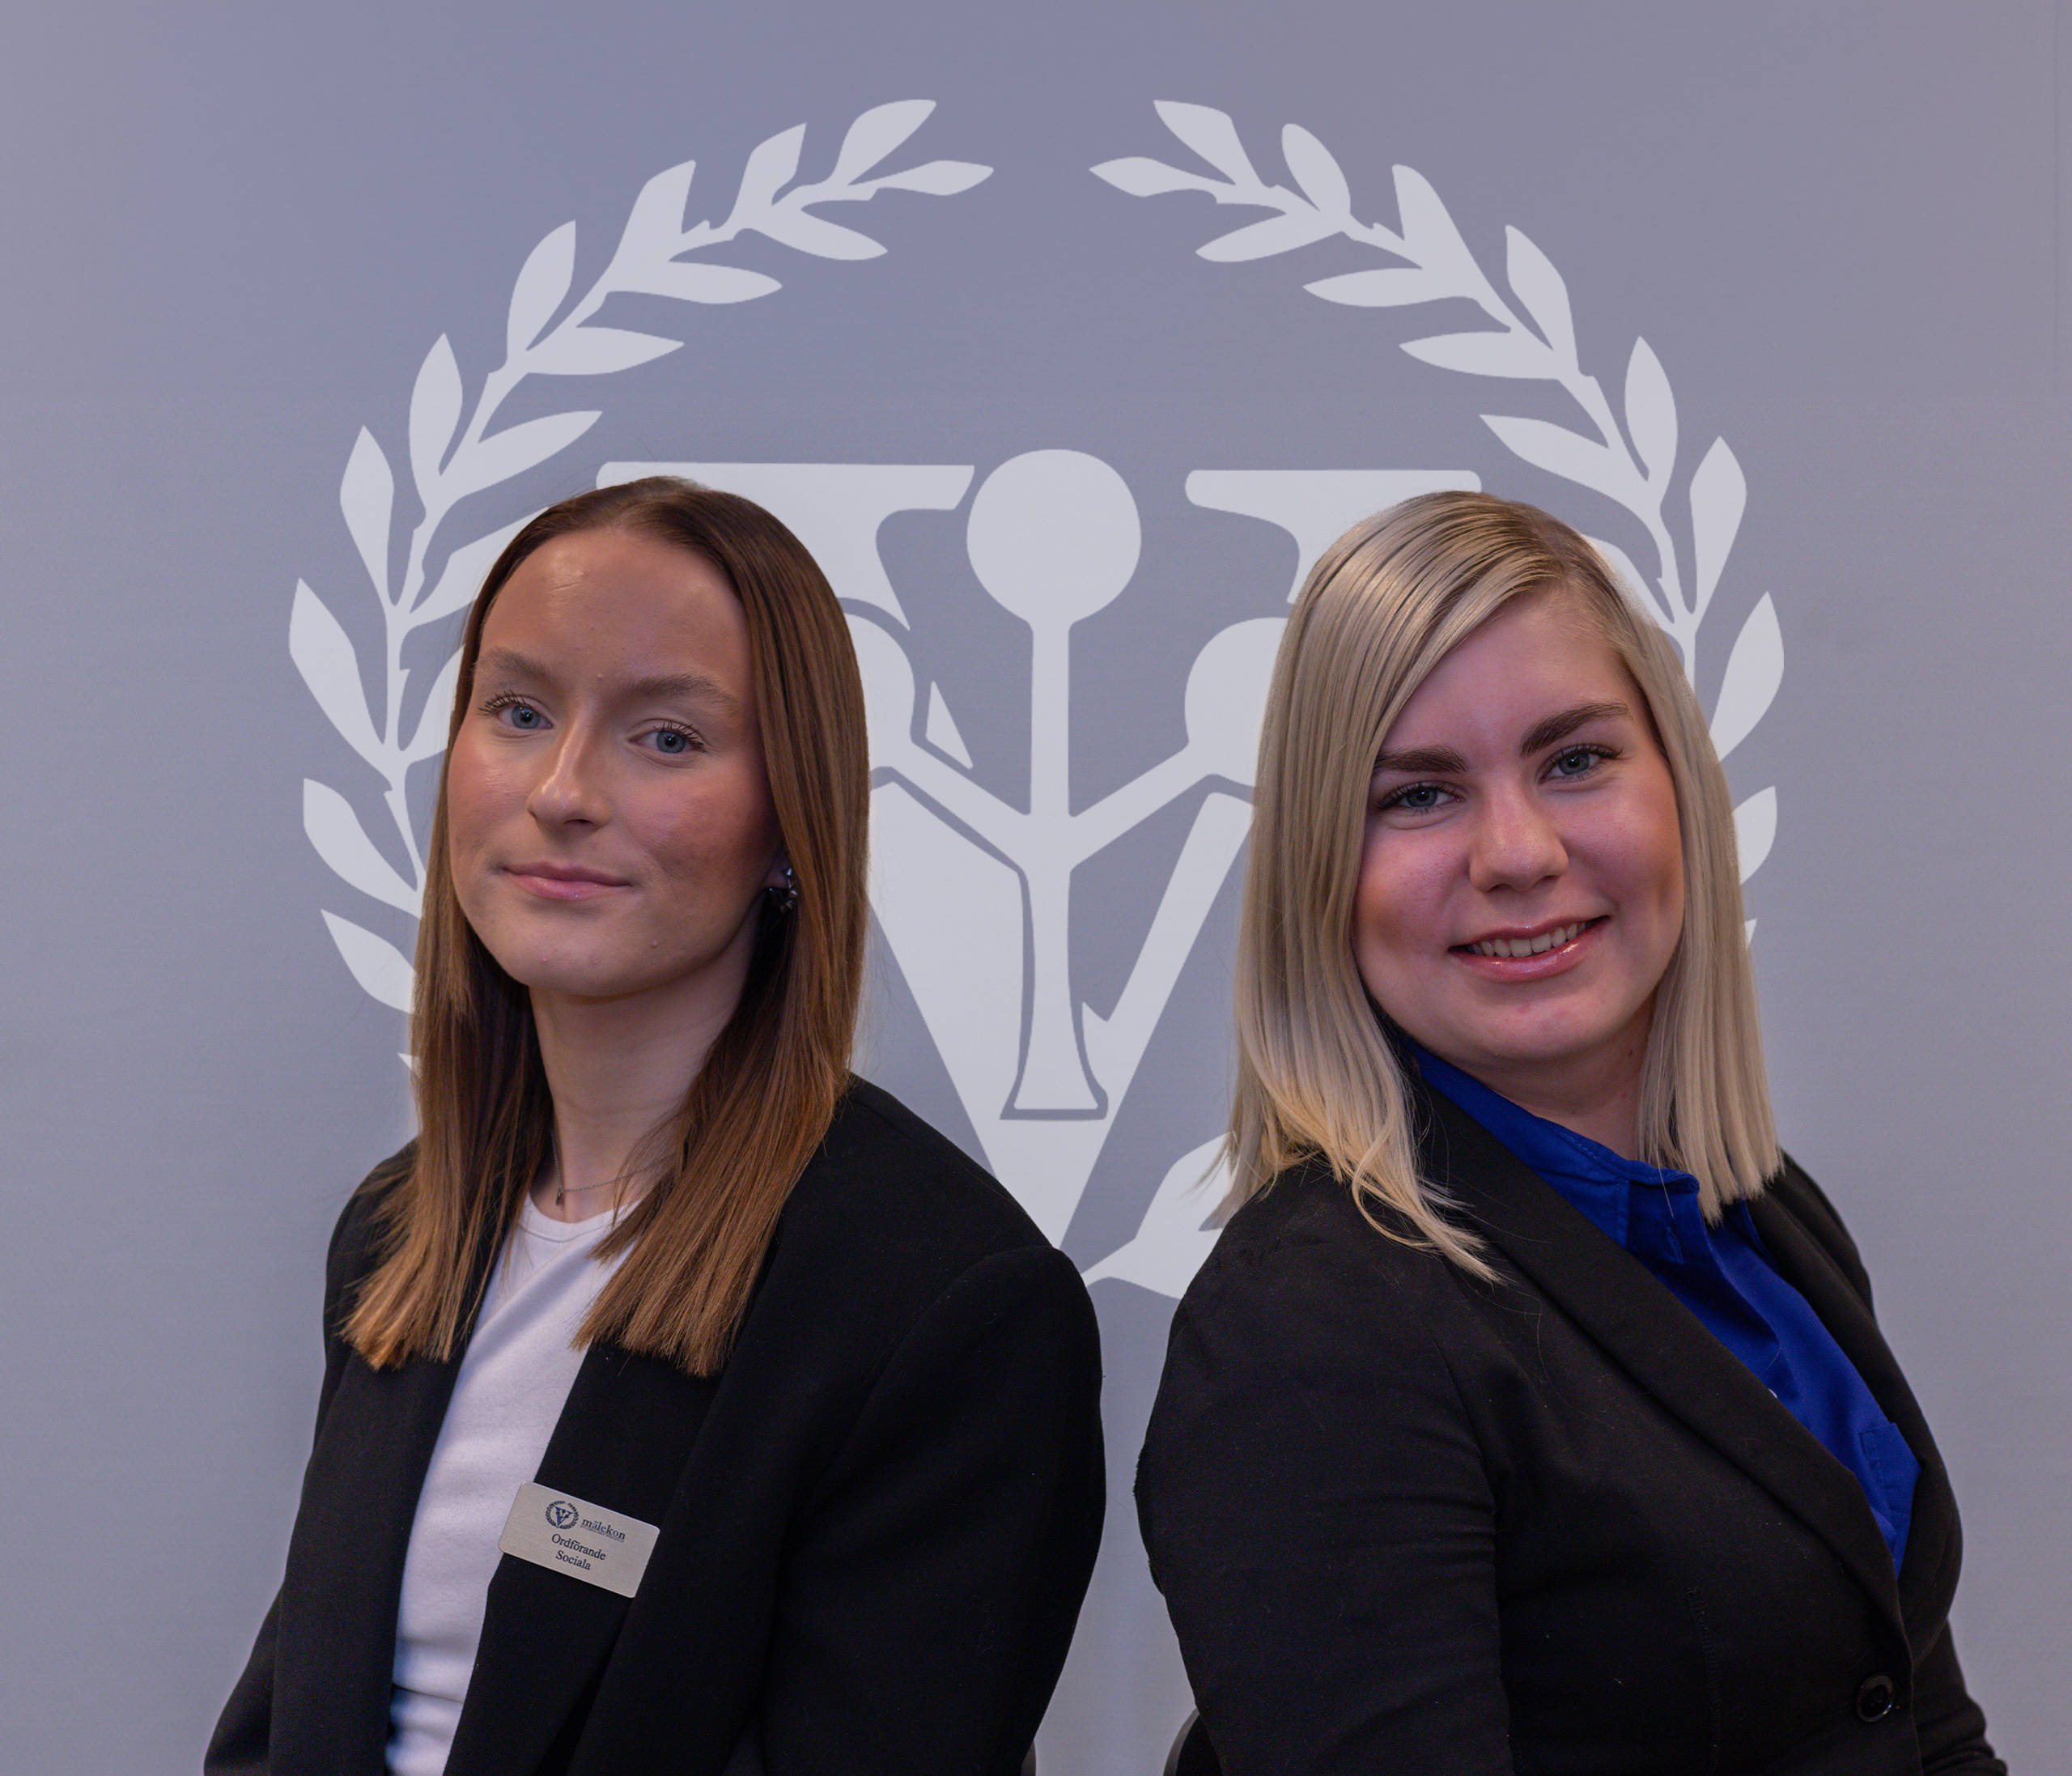 Nicole, Chairperson of the Social committee, and Jennifer, Vice Chairperson of the Social committee, of Mälekon.